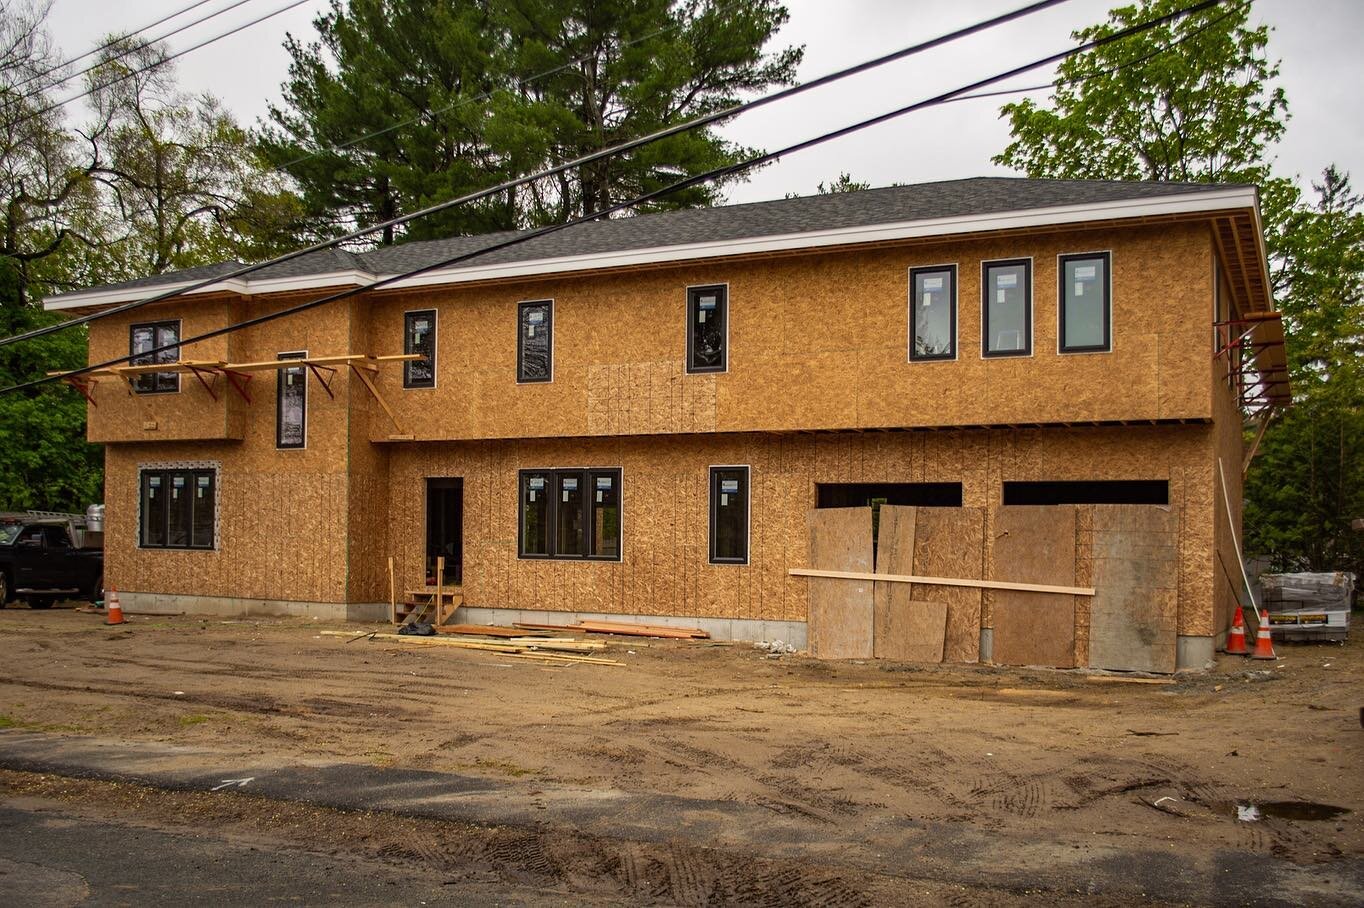 CONSTRUCTION UPDATE: 1 Liberty St, Natick // 

5000+ sqft contemporary new construction with a finished basement, 5 beds, 4.5 baths, 2 car garage, in the highly desirable Wethersfield Neighborhood! 

Available to show! Inquiries:

781-697-7116
Vincen